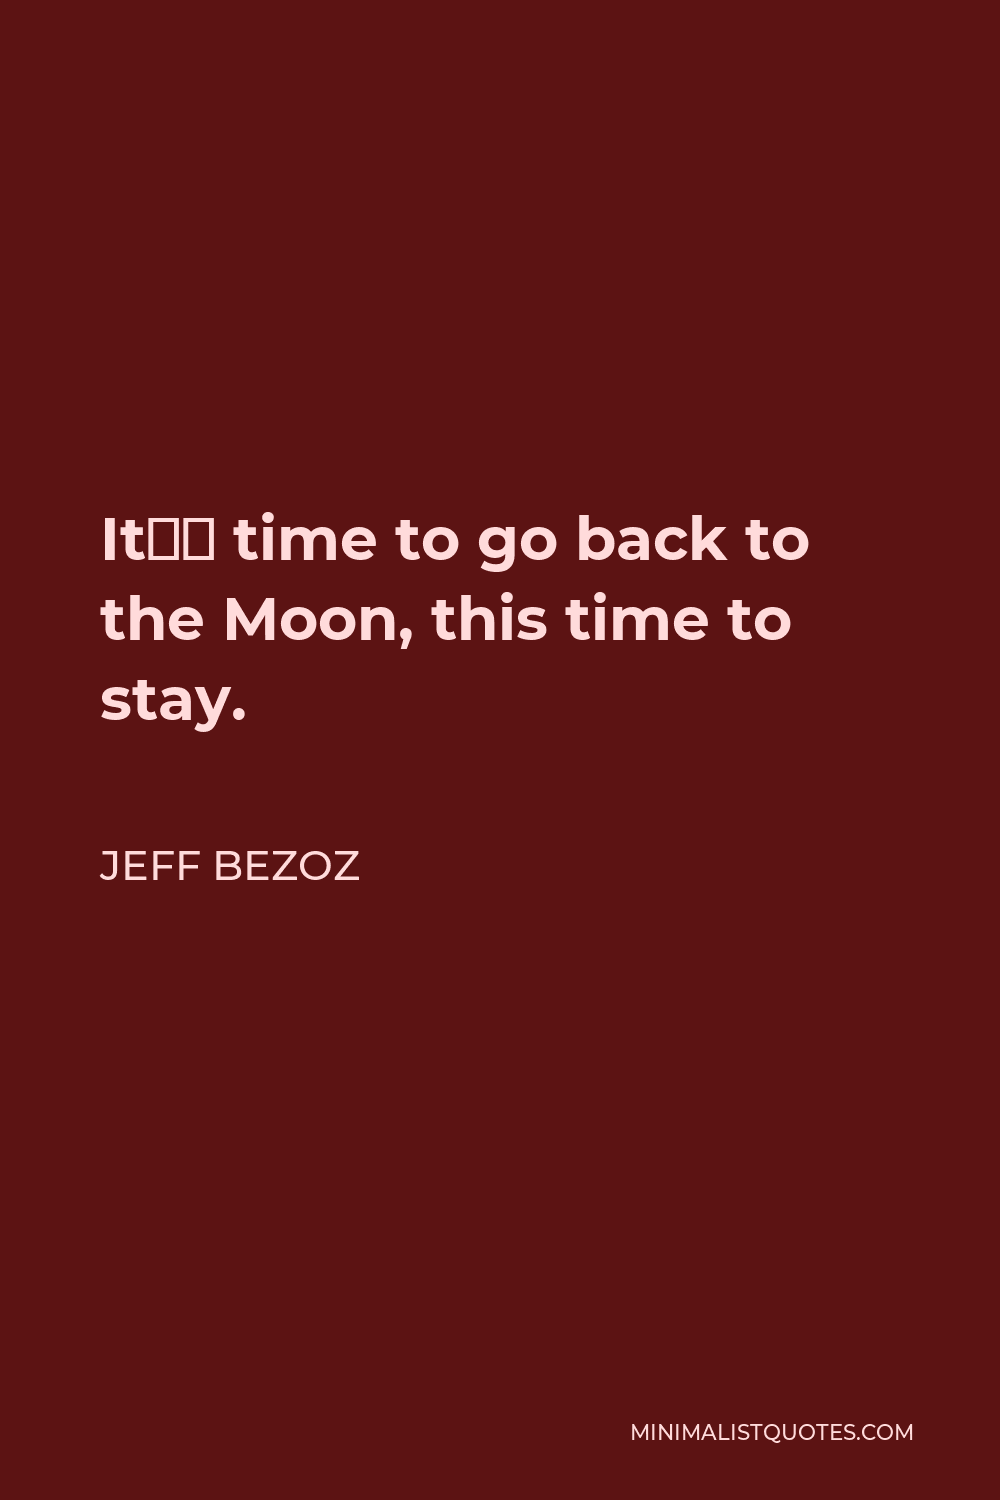 Jeff Bezoz Quote - It’s time to go back to the Moon, this time to stay.